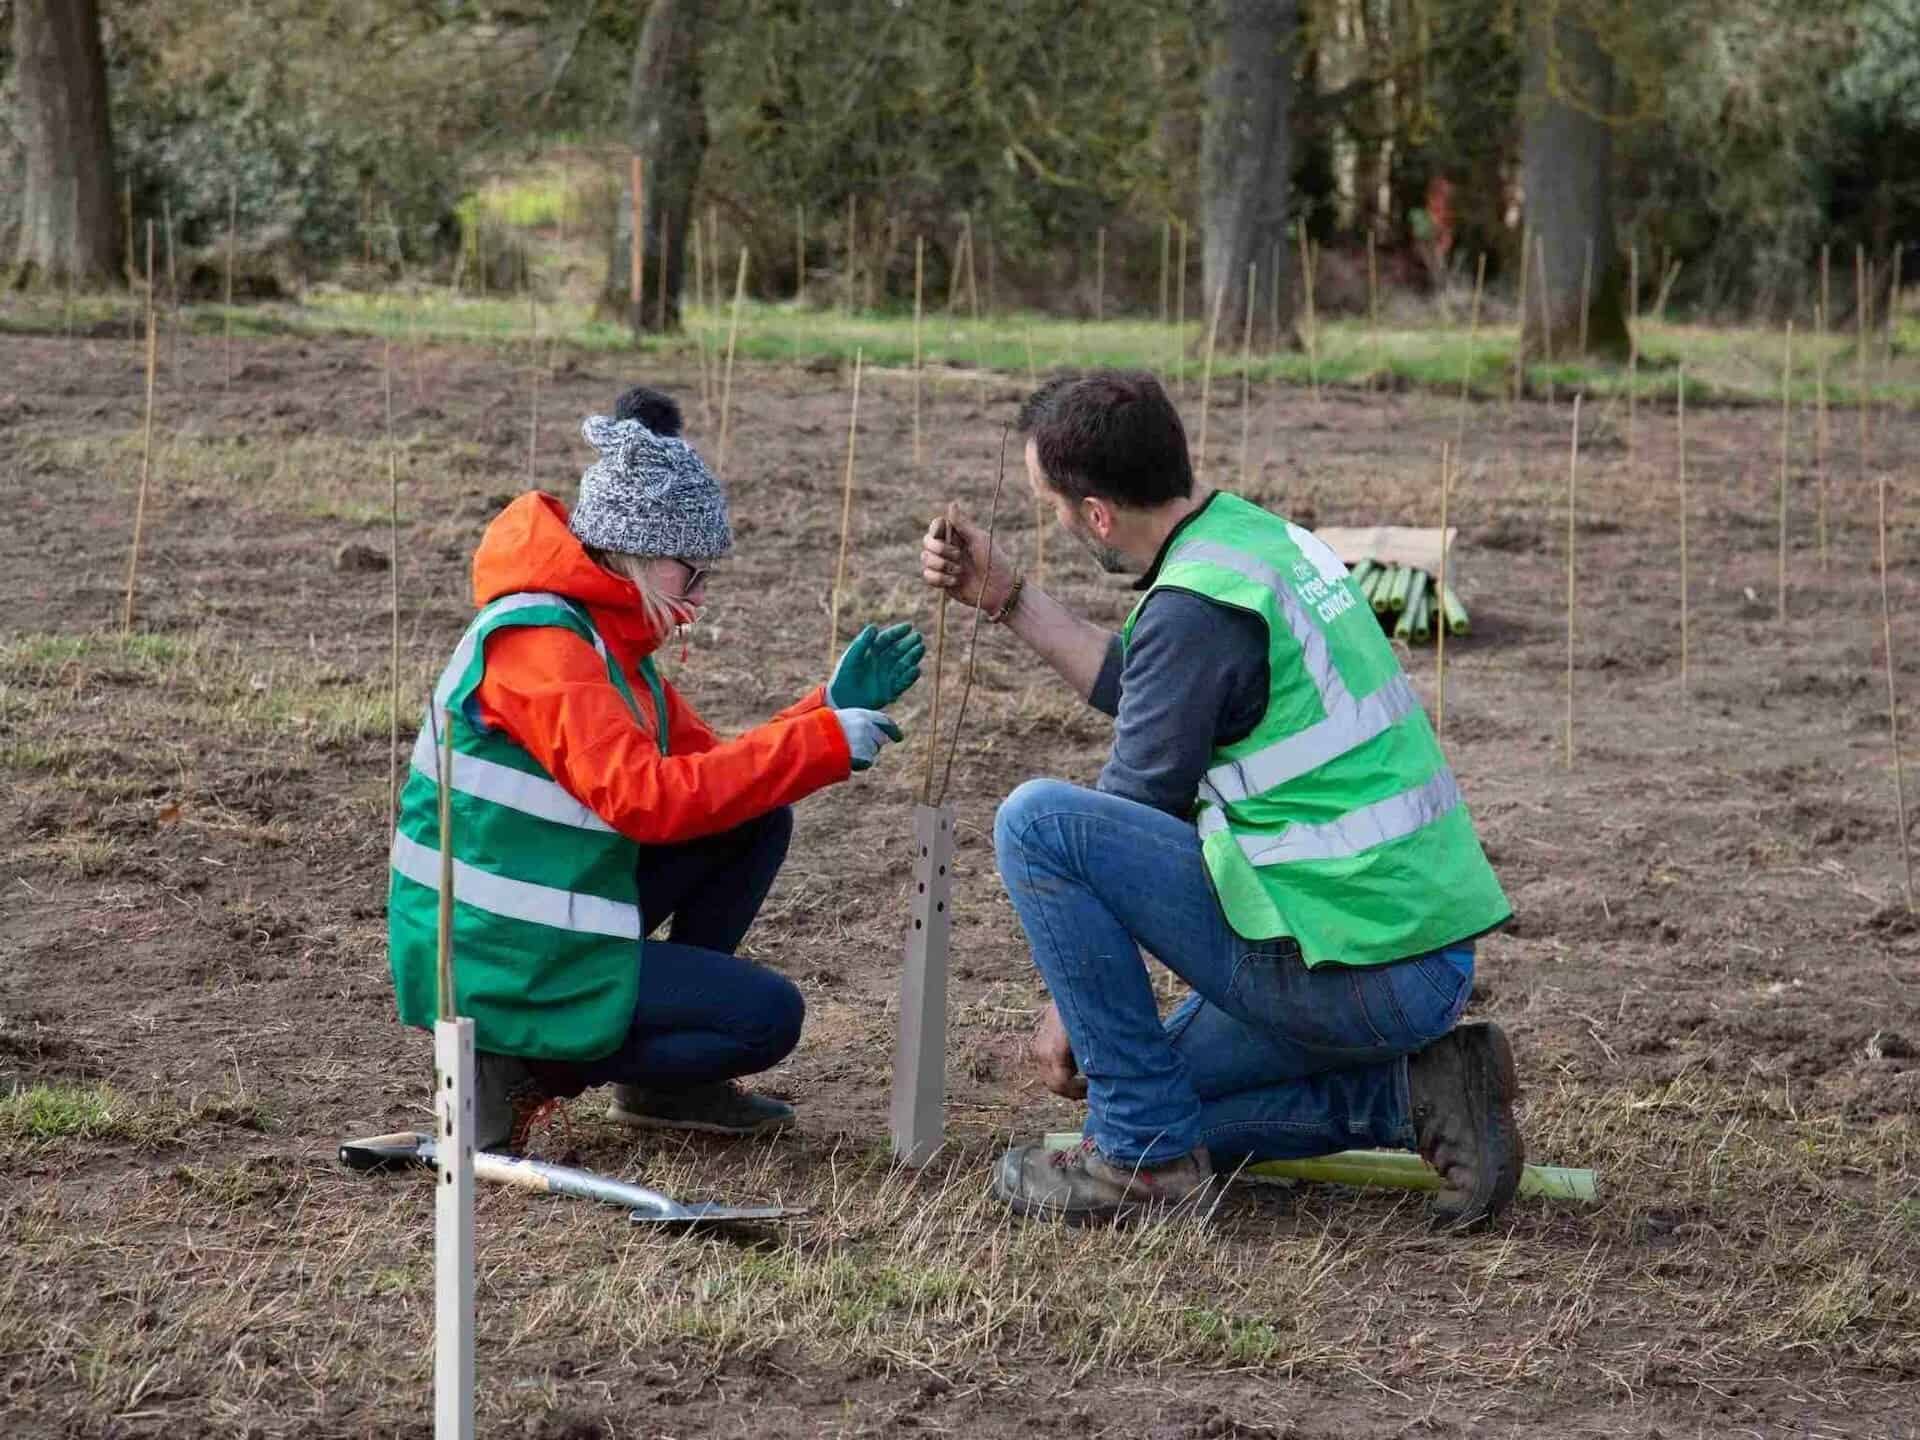 Want to plant trees and rewild the right way? Discover the best tree planting charities in the UK.